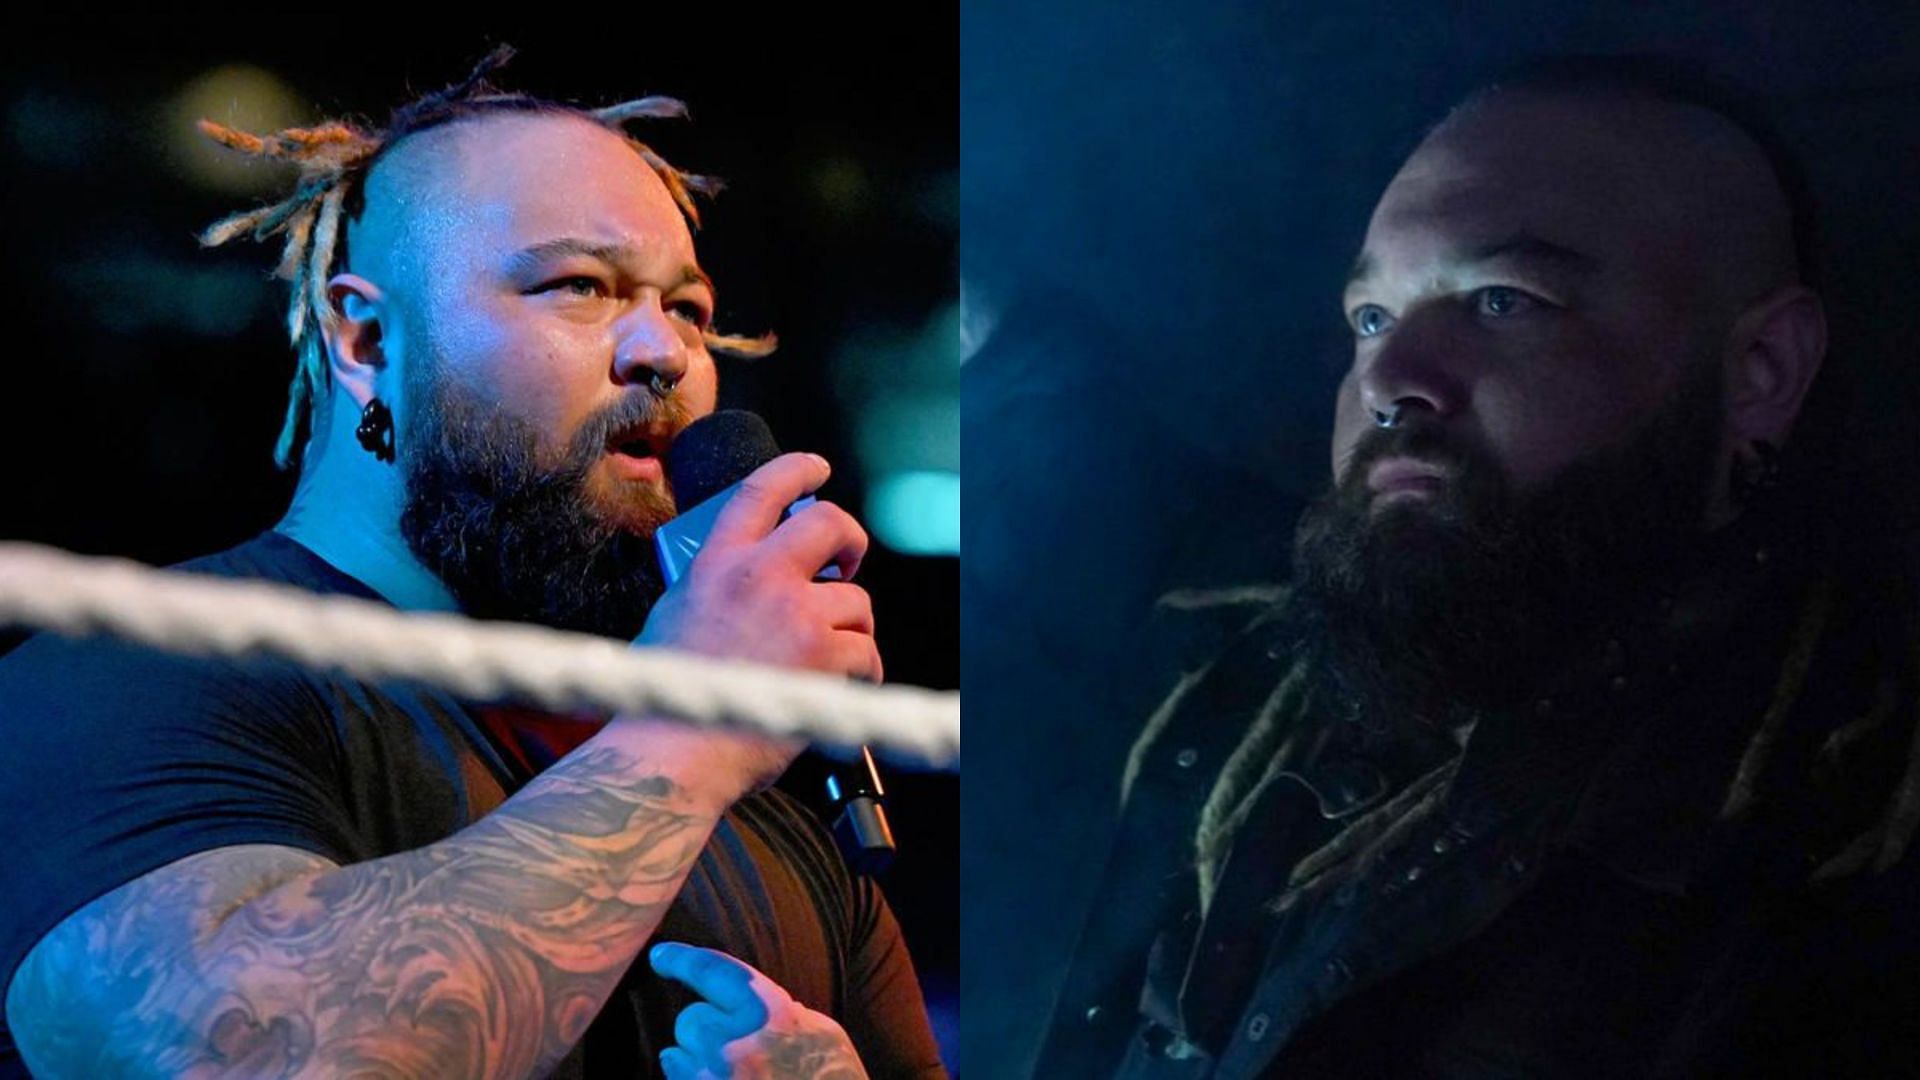 Bray Wyatt returned to WWE earlier this month